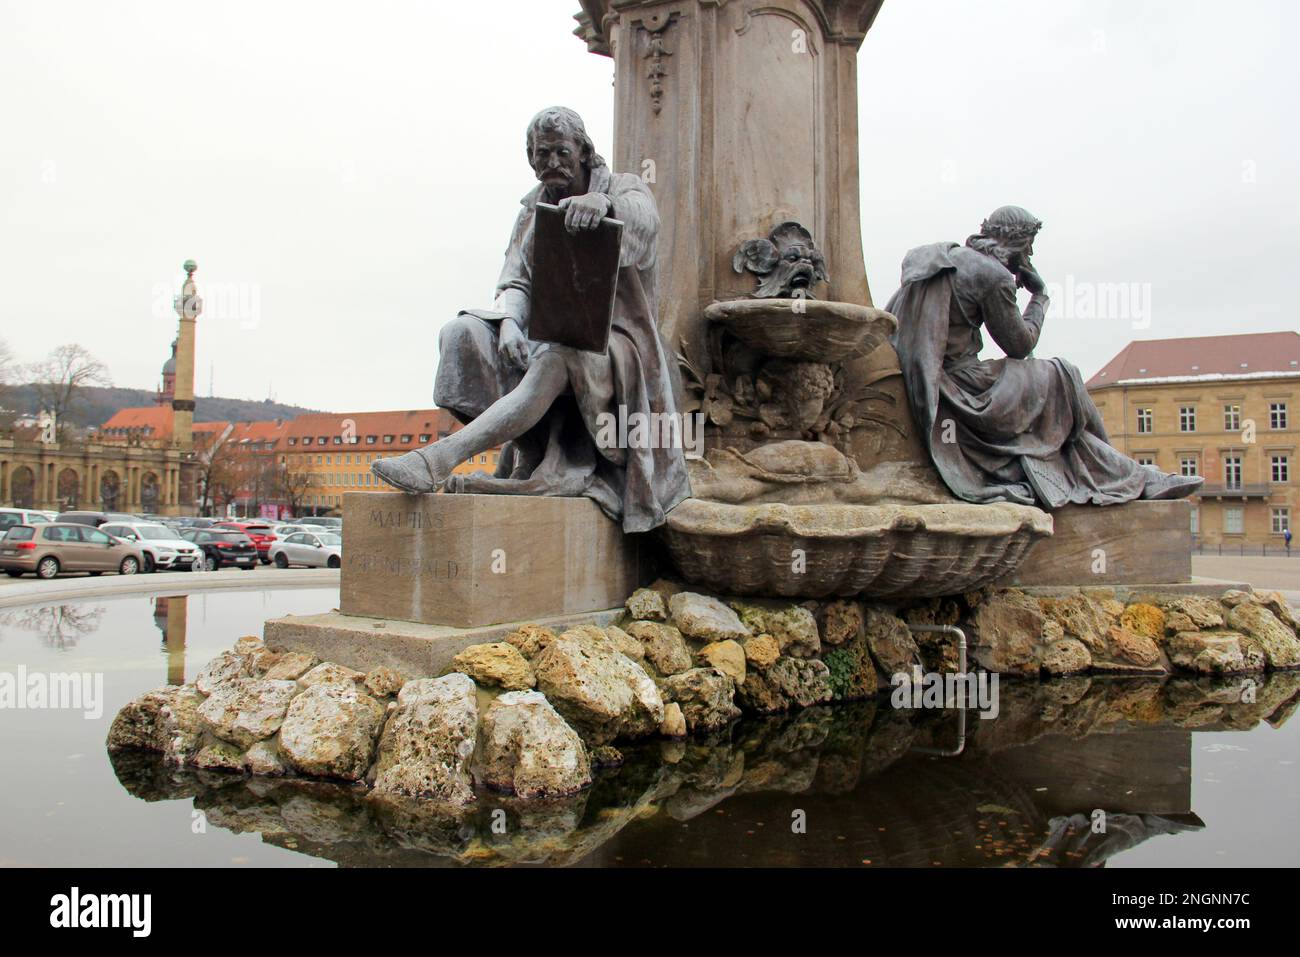 Sculptures of famous historical personae, at the Frankonianbrunnen, neo-baroque fountain in front of the Archbishopric Palace, Wurzburg, Germany Stock Photo